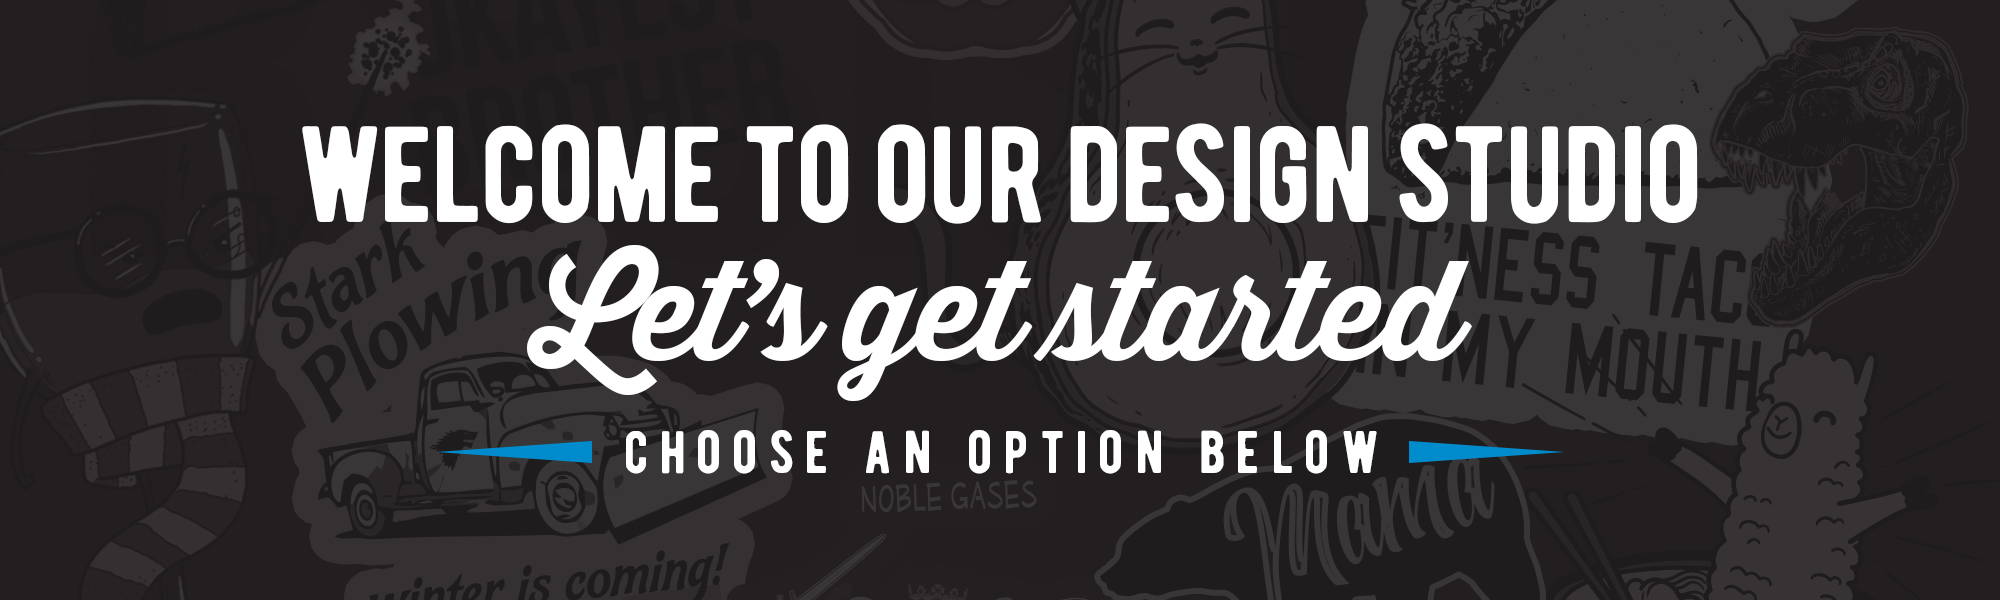 Welcome To Our Design Studio. Let's Get Started. Choose An Option Below.